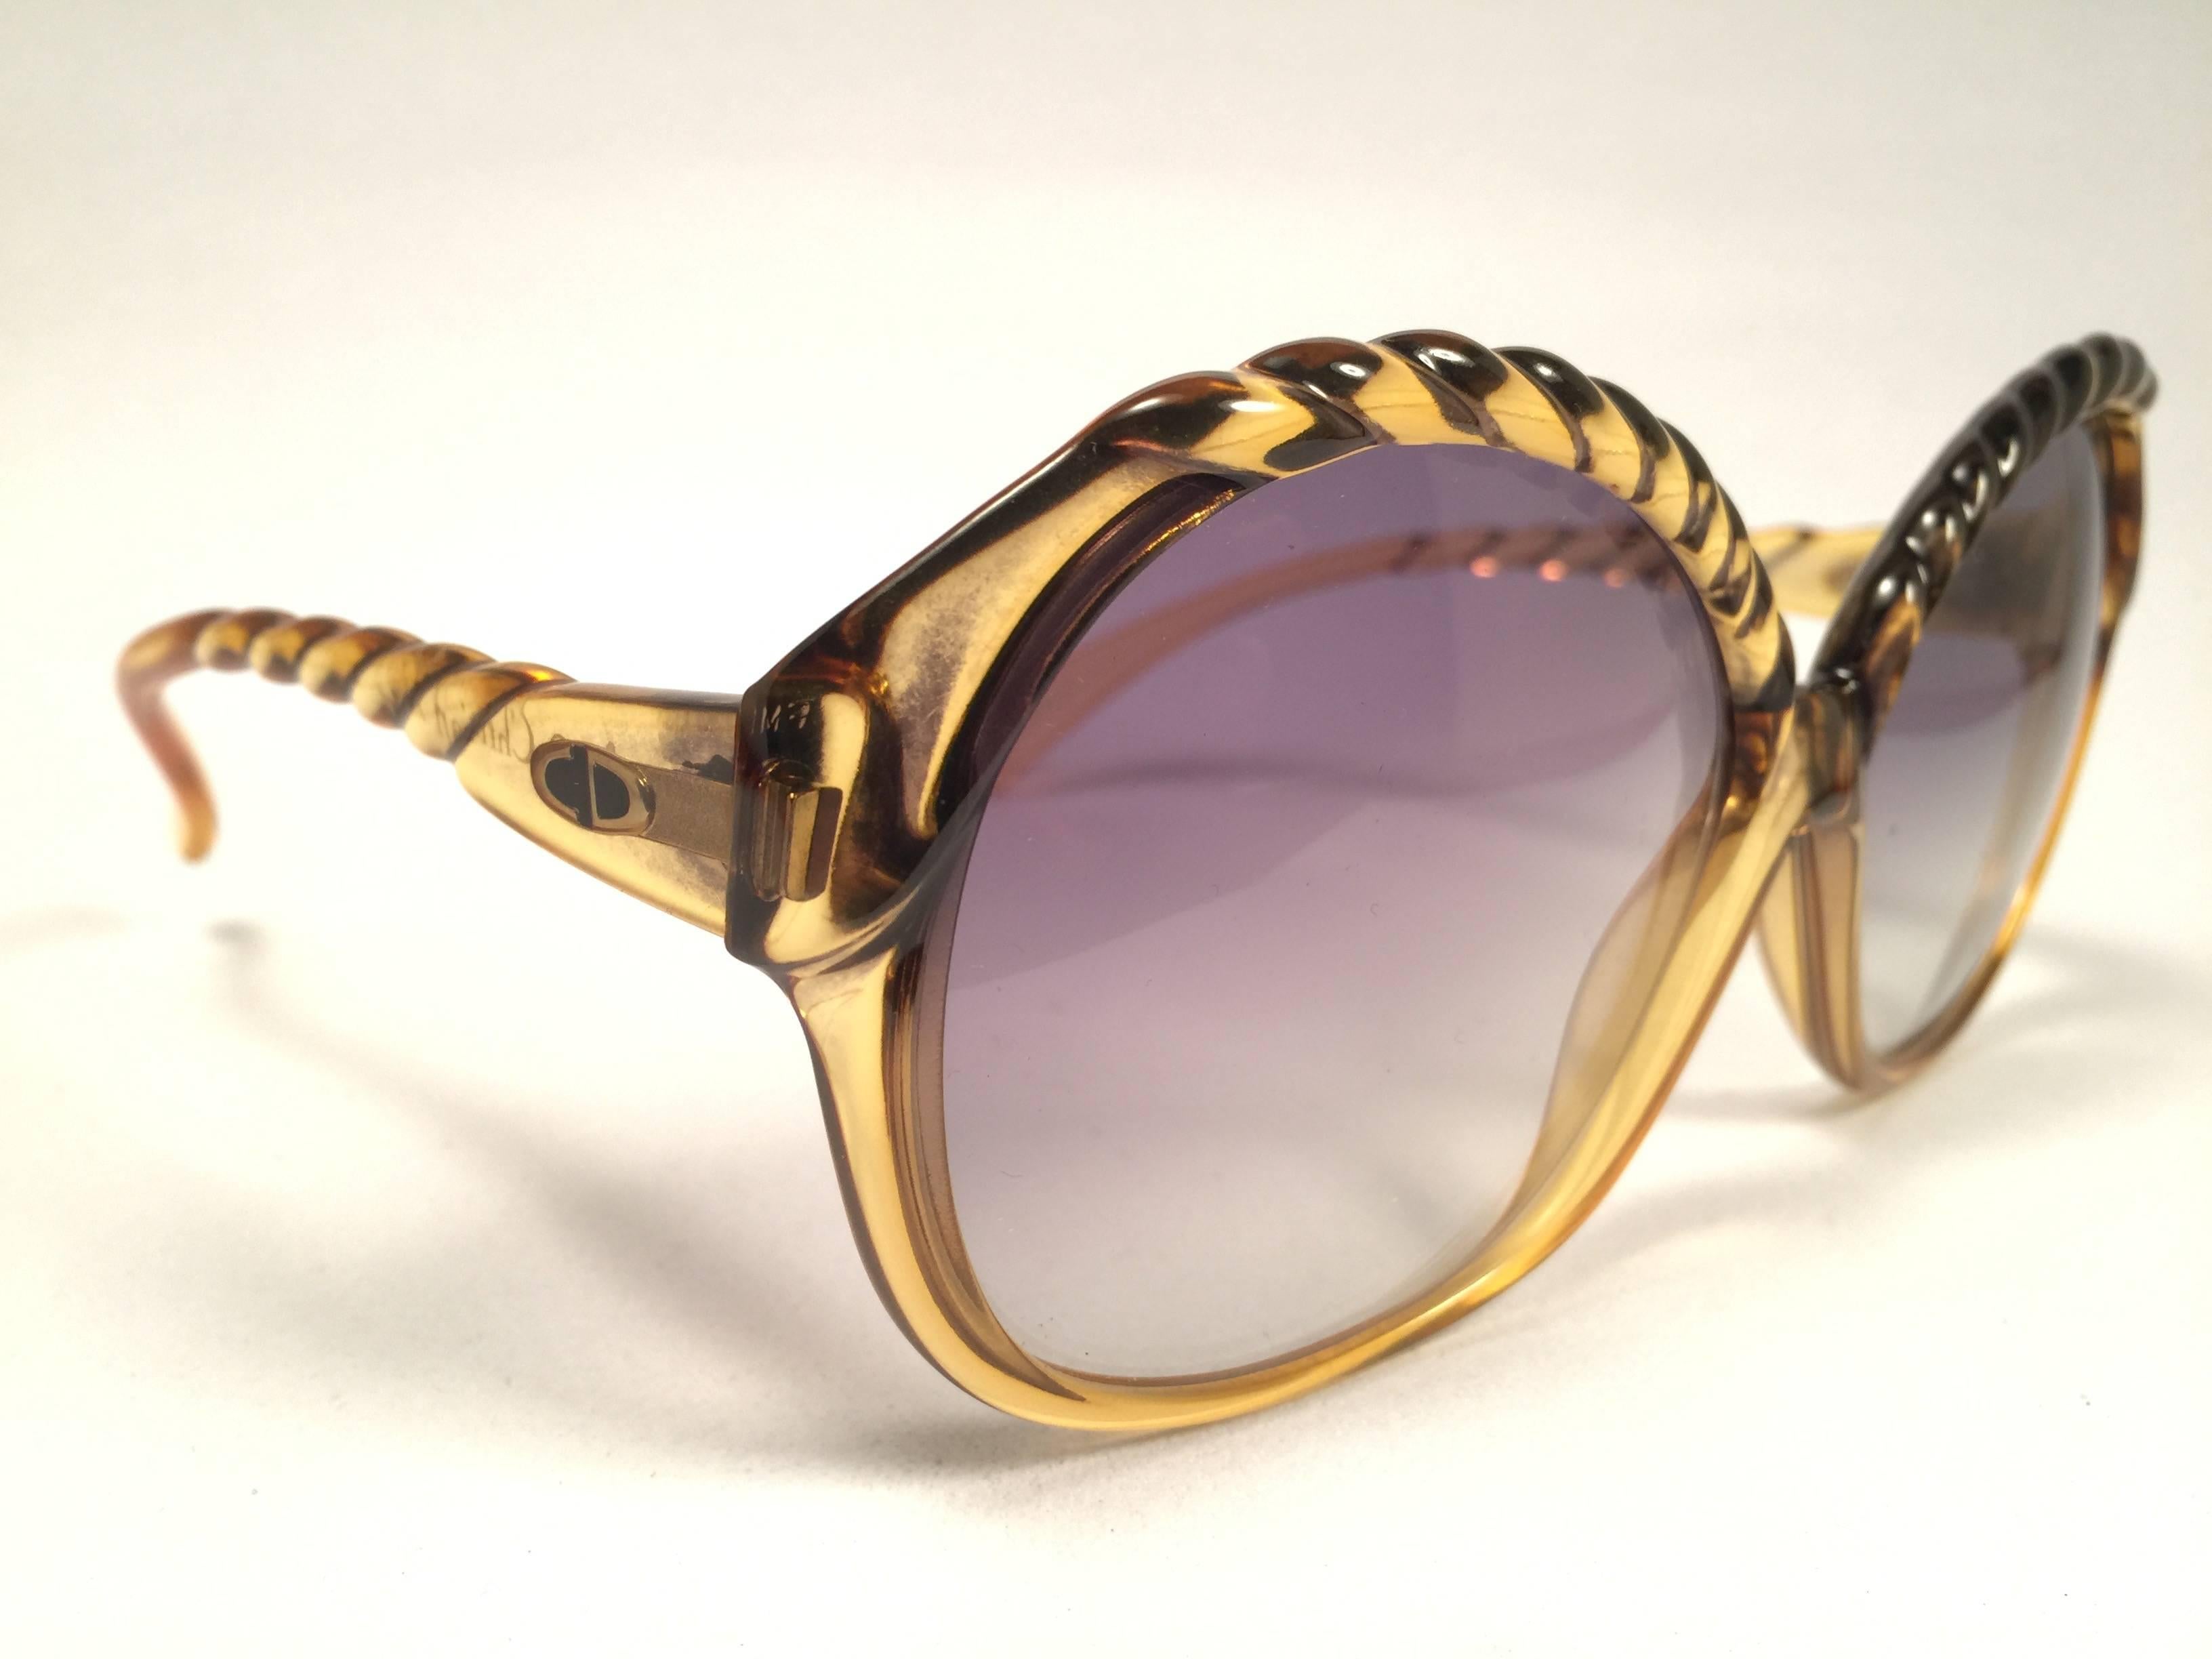 Mint Vintage Christian Dior 2063 20 Oversized translucent 1980's frame with spotless lenses.   
Made in Germany.  

Comes with its original silver Christian Dior Lunettes sleeve.